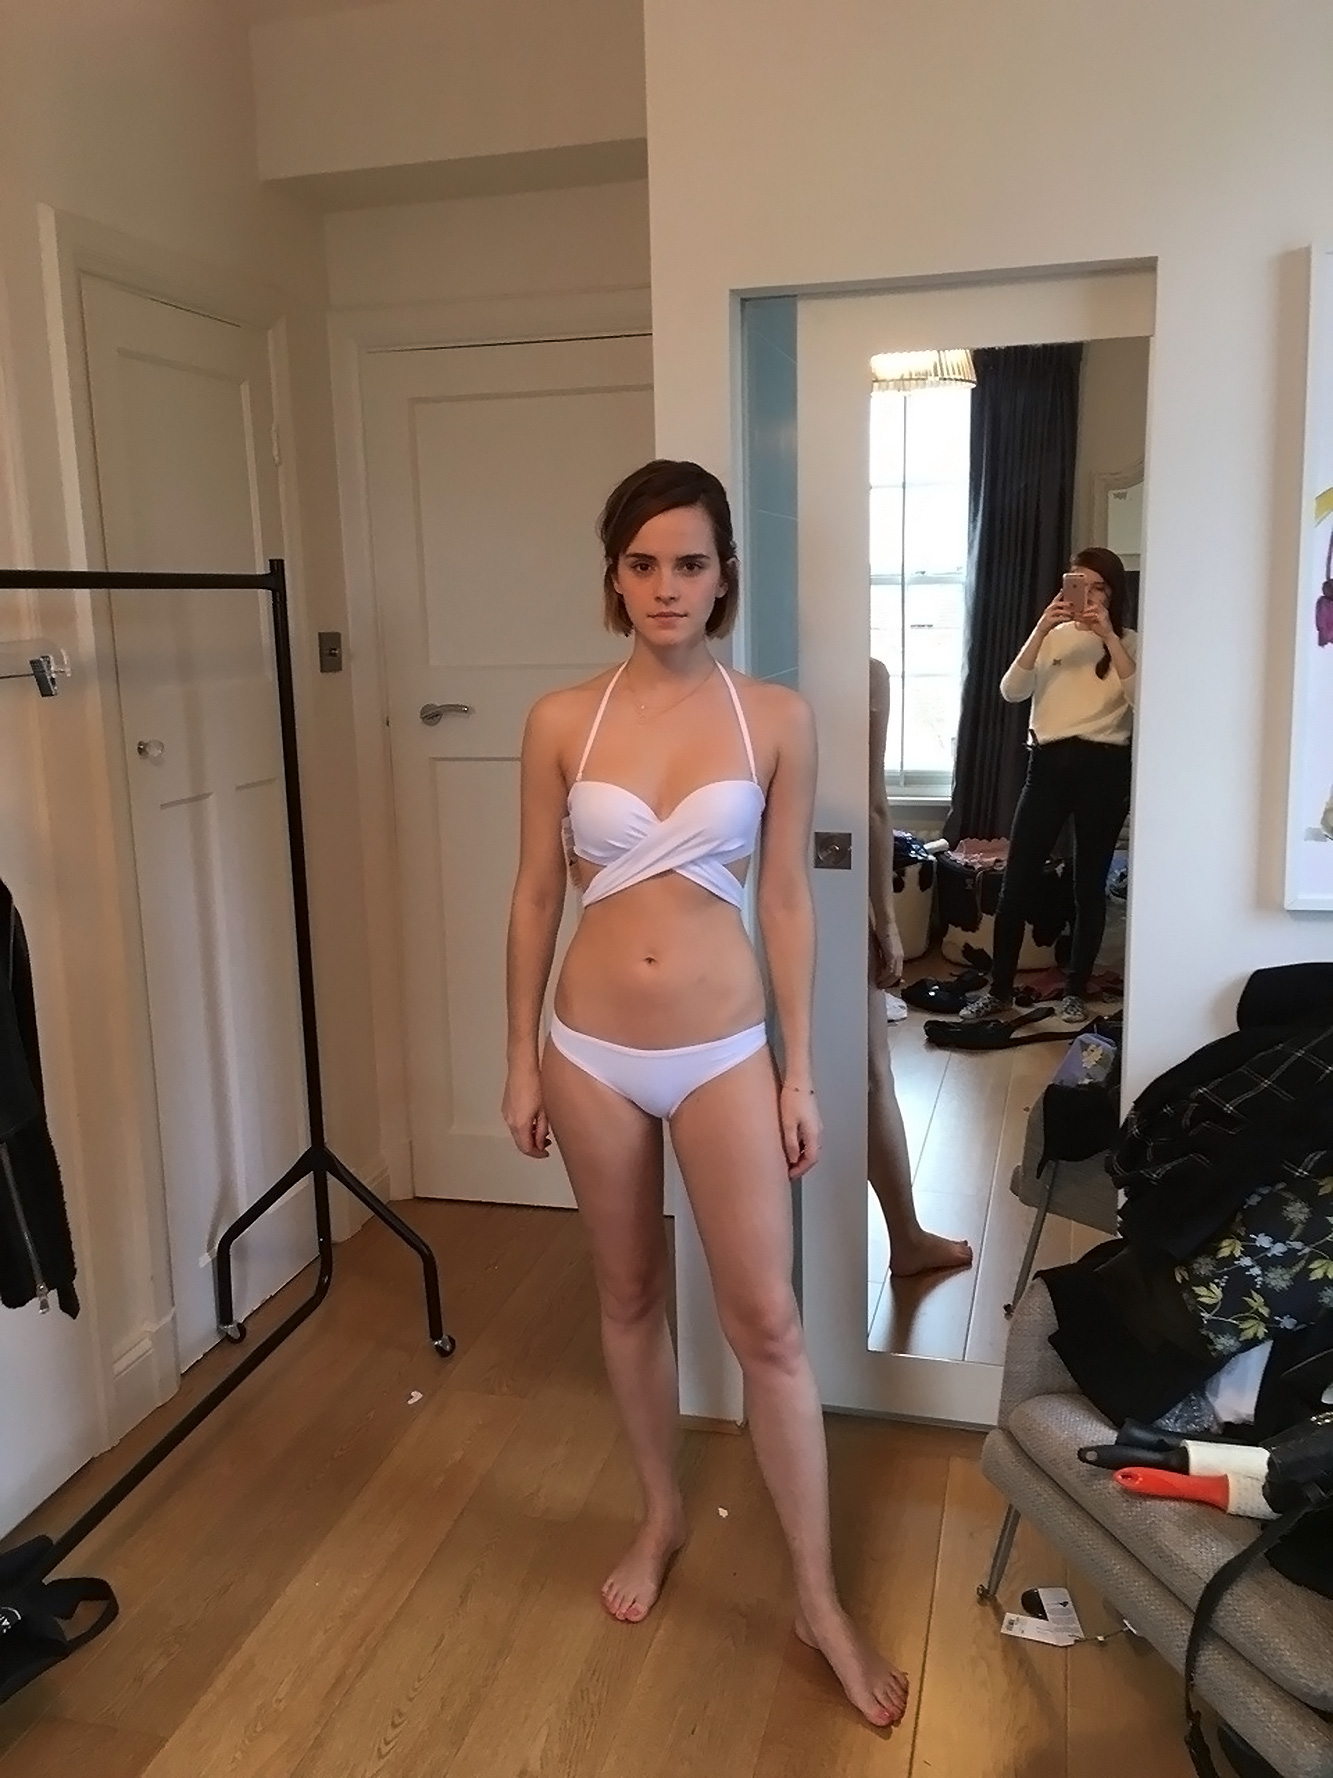 Emma Watson Leaked Porn - Bum! Emma Watson LEAKED Photos and Video [8 Nudes]